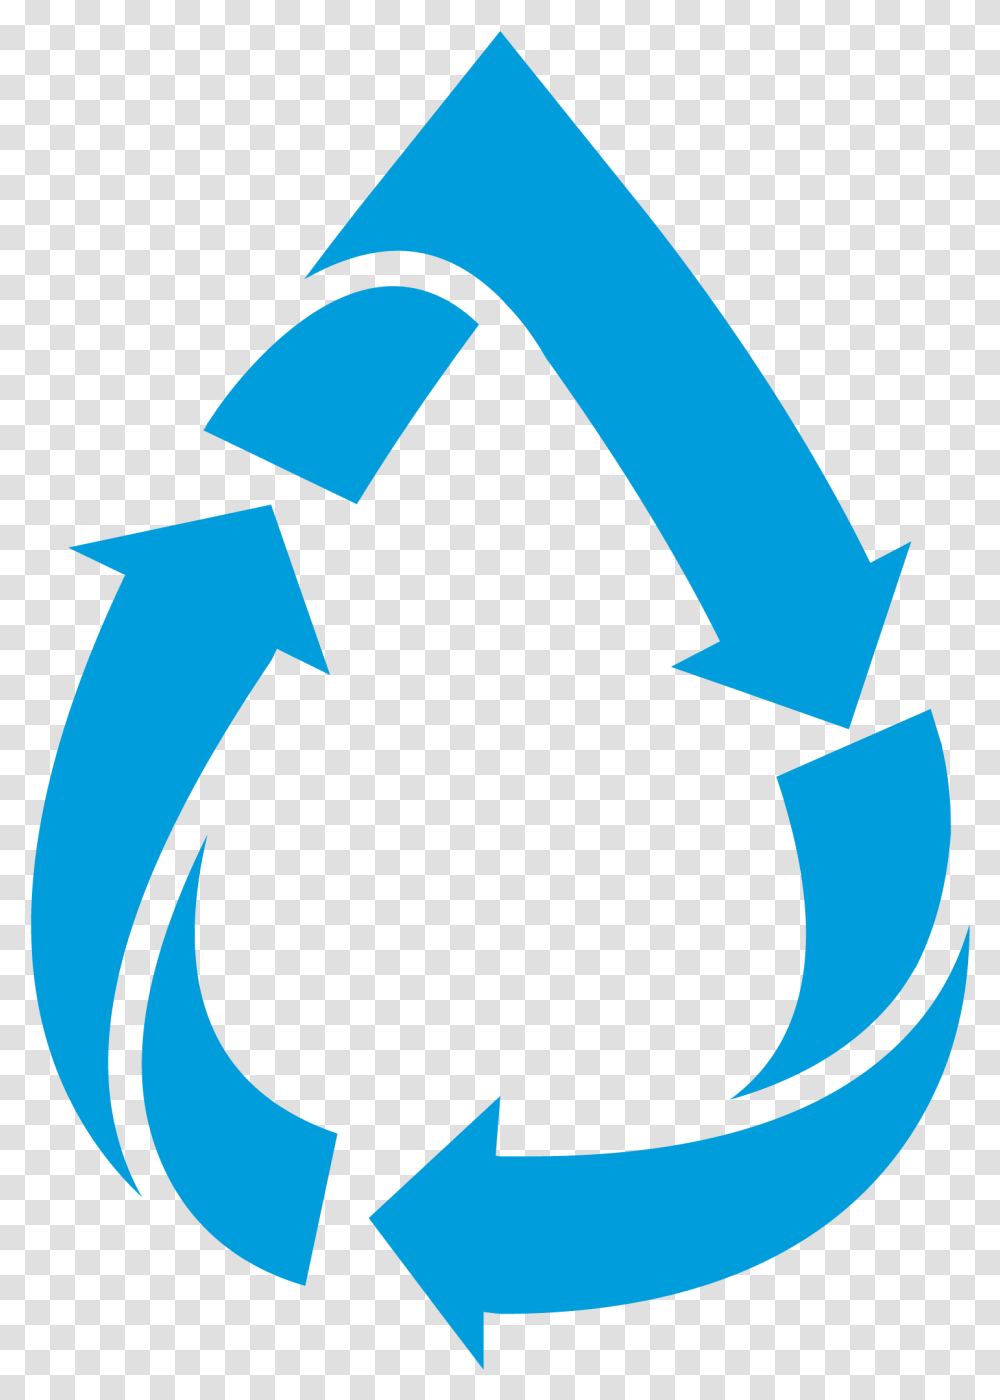 Water Recycling Icon Clipart Full Size Clipart Icon Save Water, Recycling Symbol Transparent Png